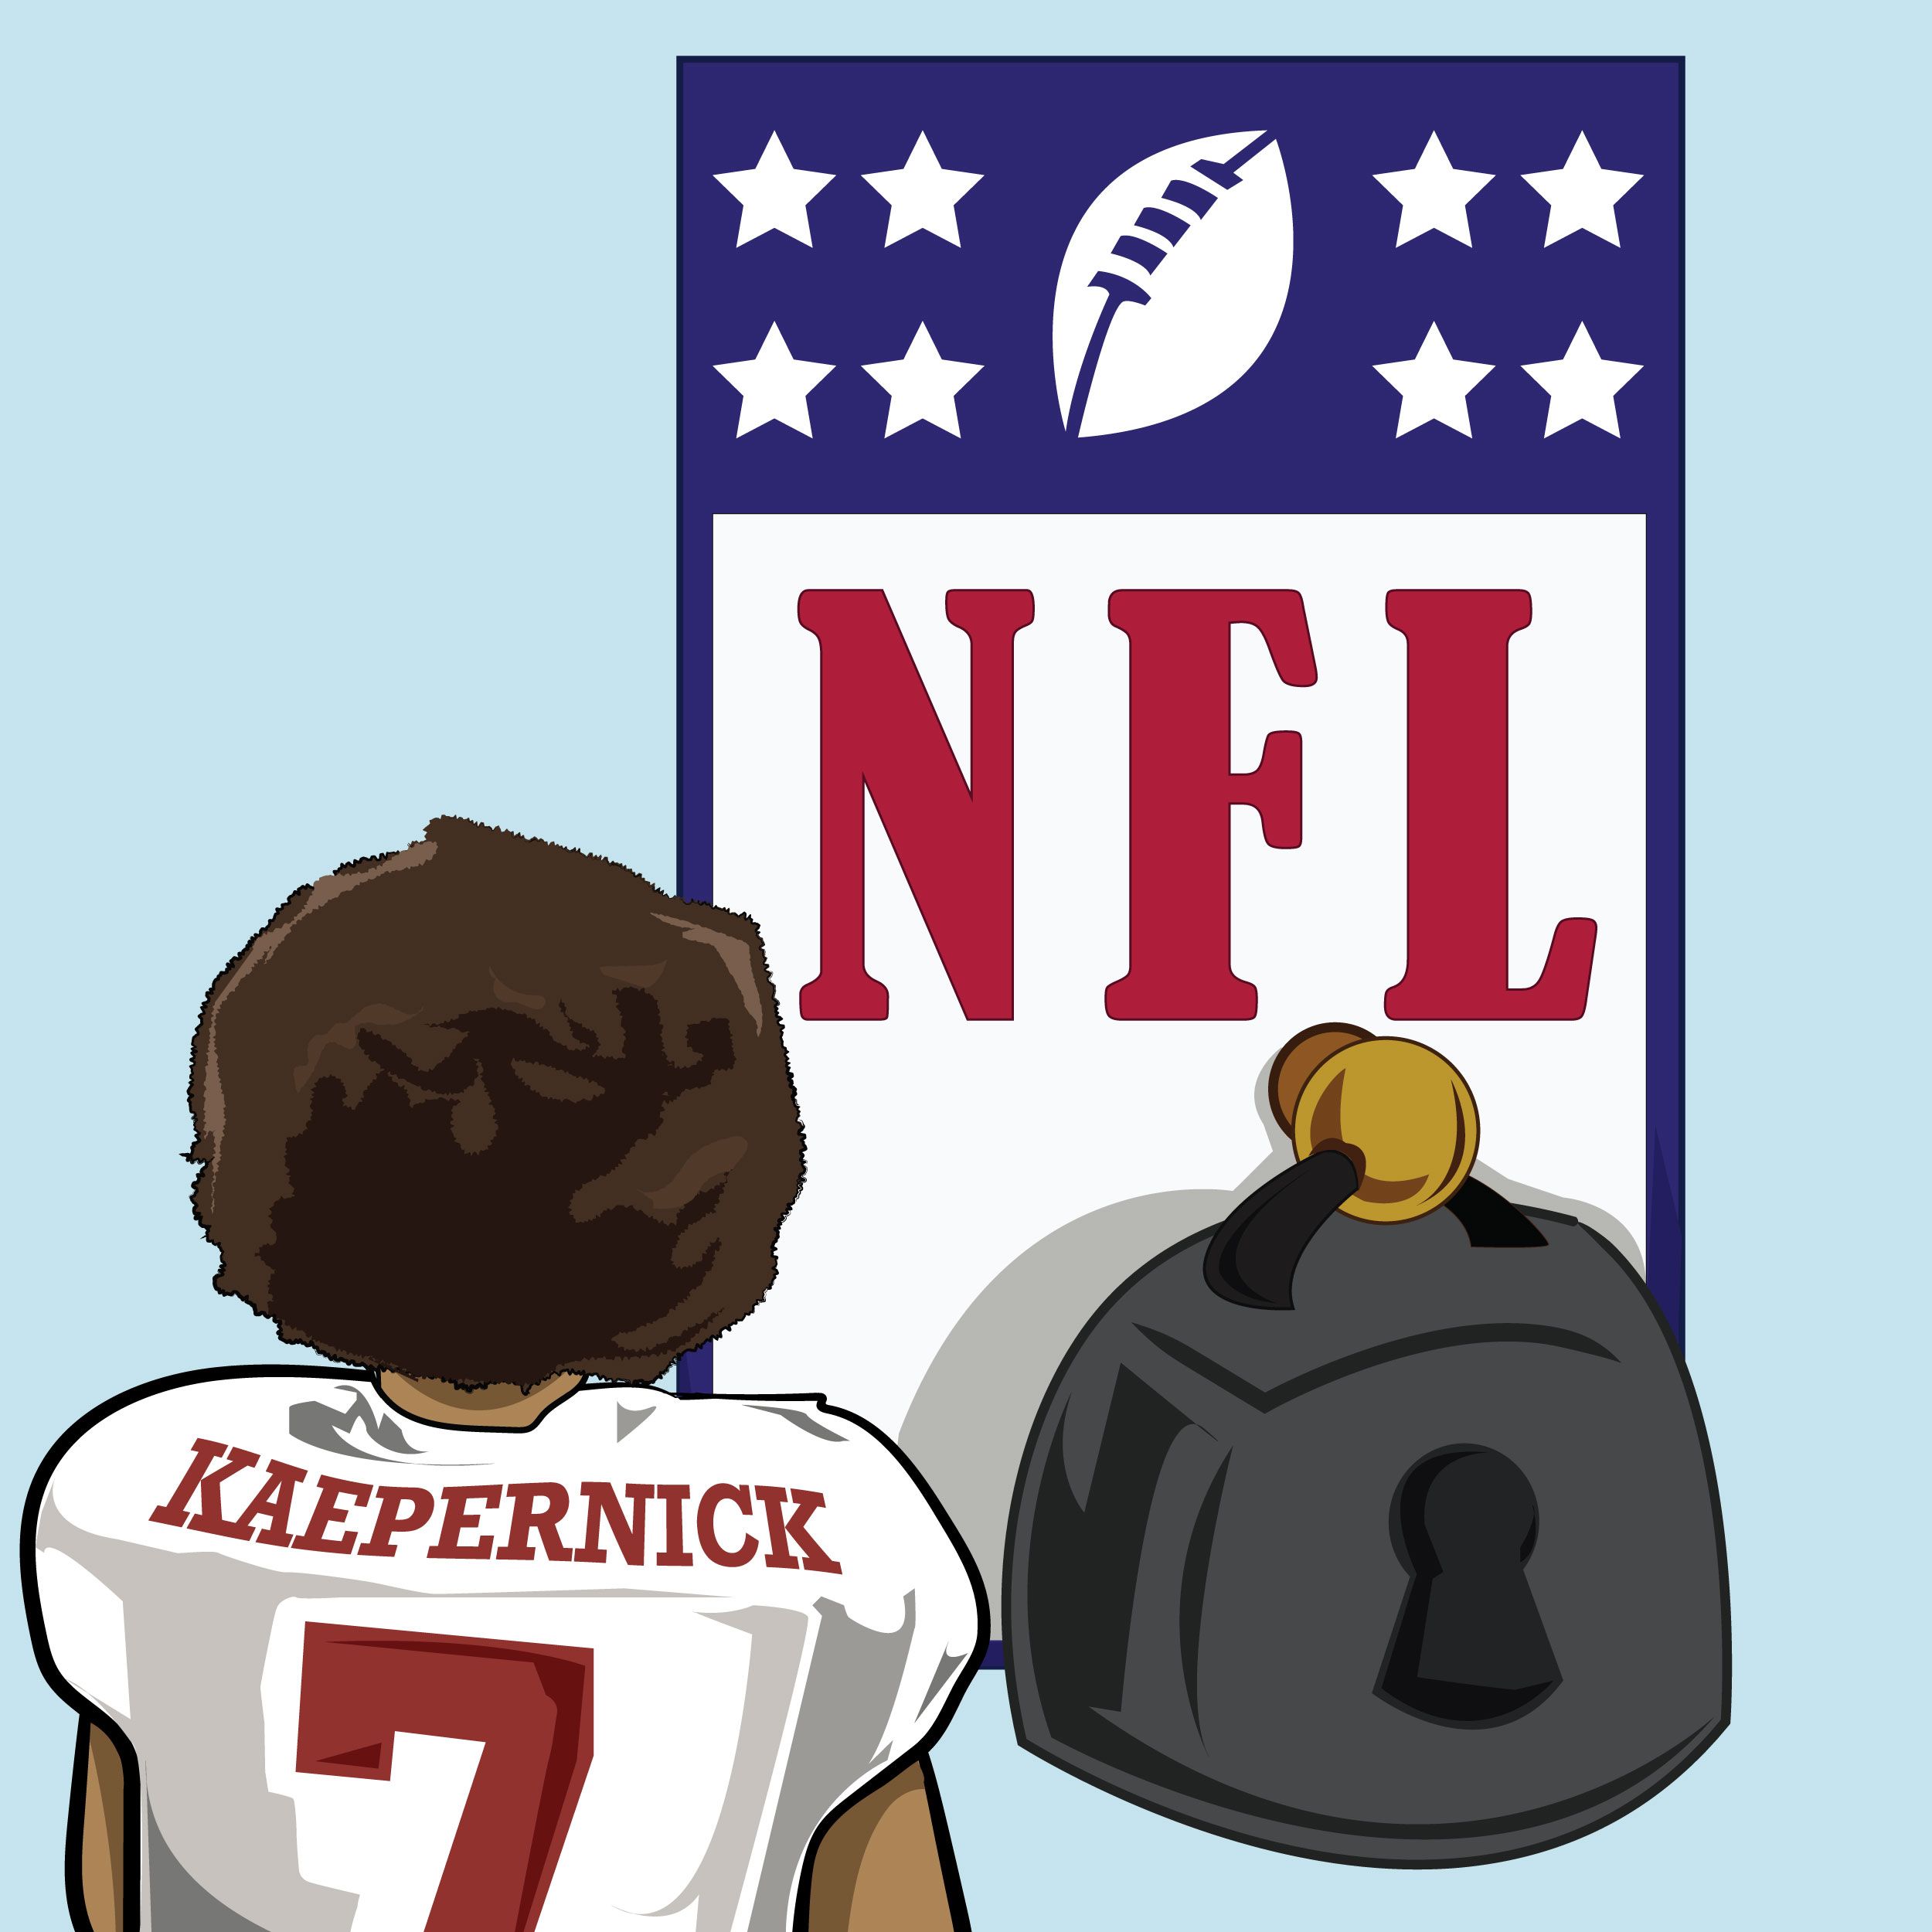 Colin Kaepernick has started a movement. See more artwork on.